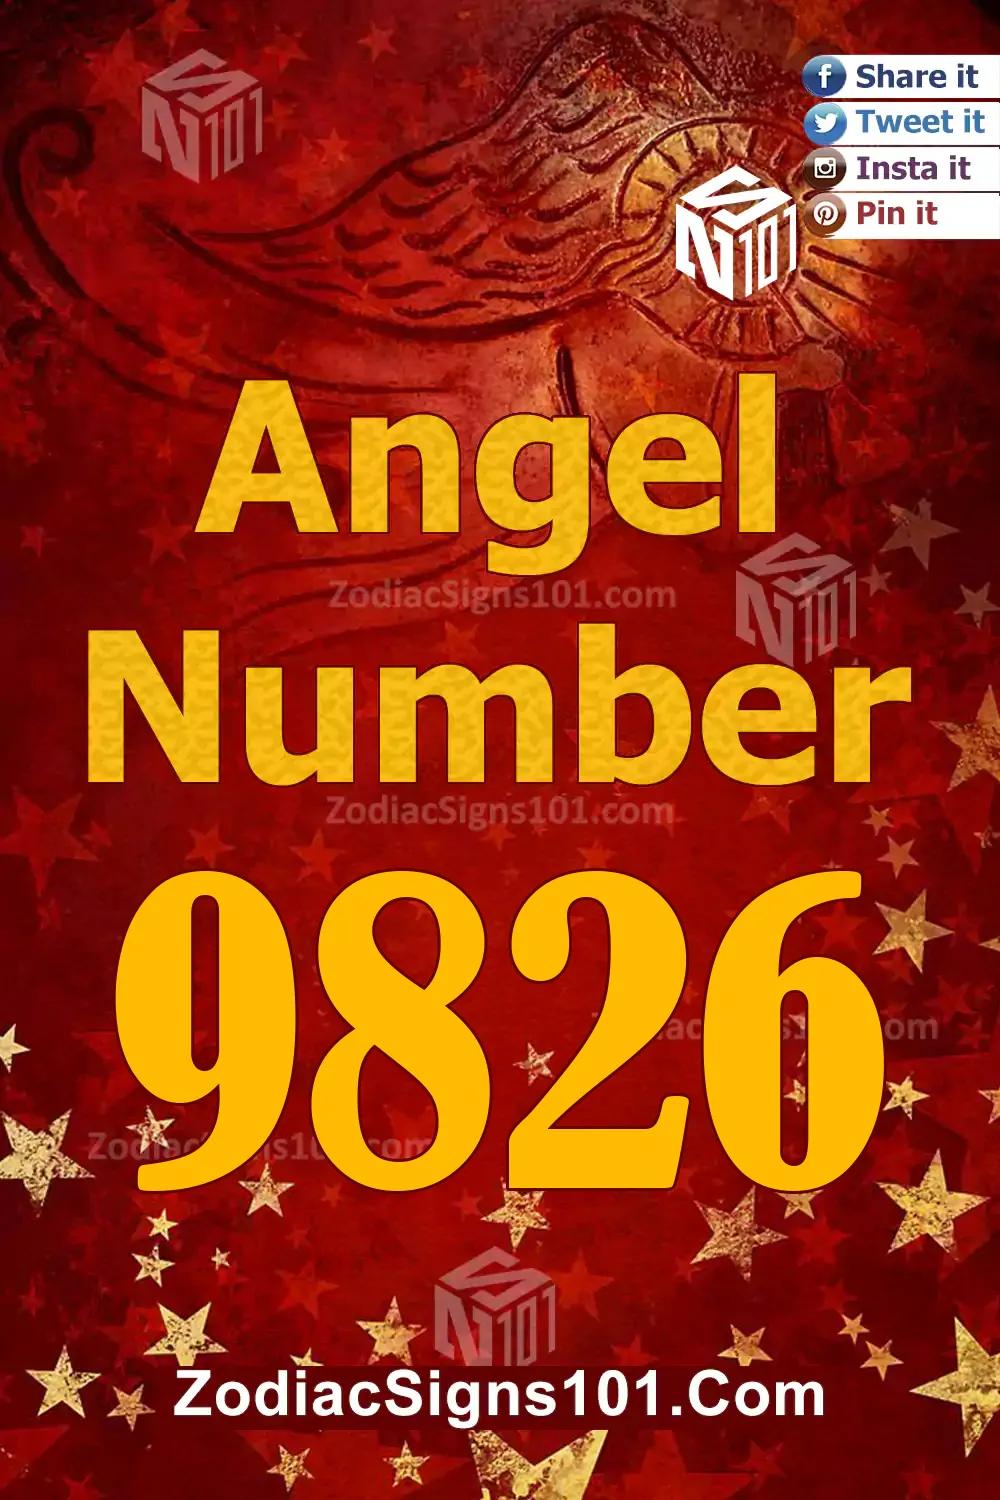 9826 Angel Number Meaning